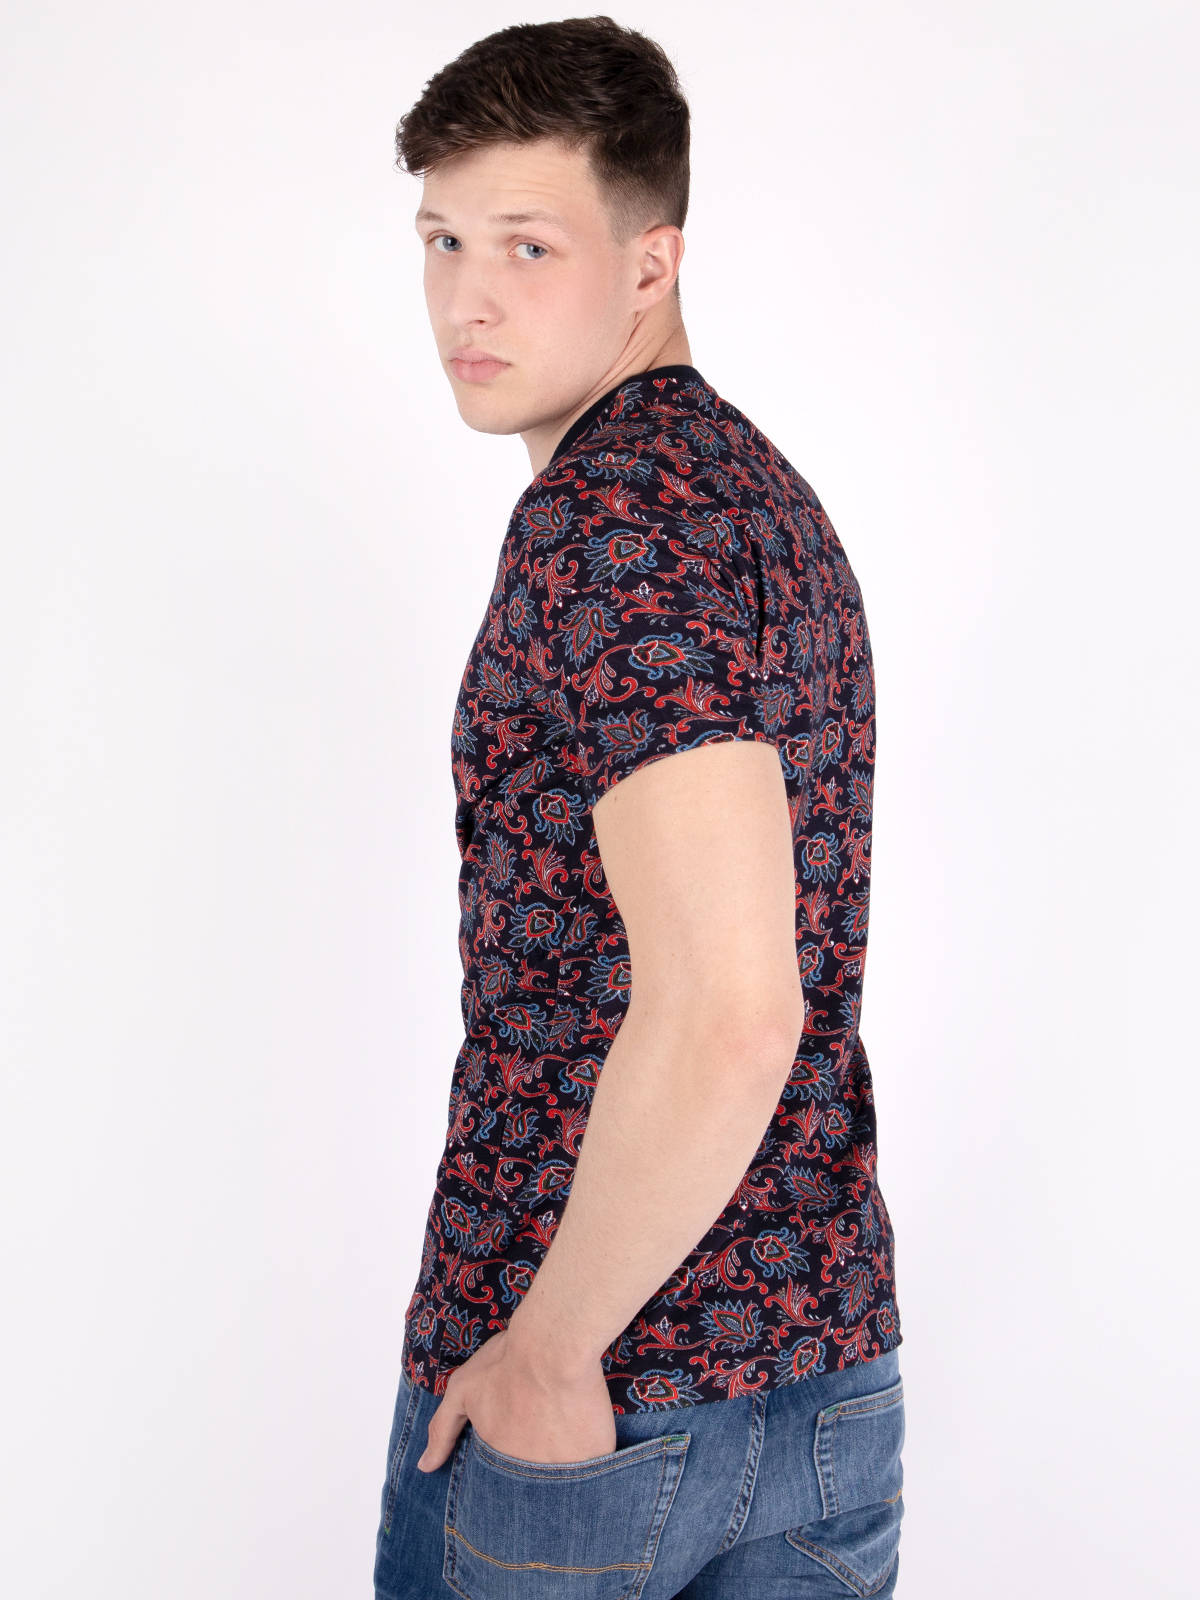 Tshirt in navy blue with floral motifs - 95360 € 16.31 img2